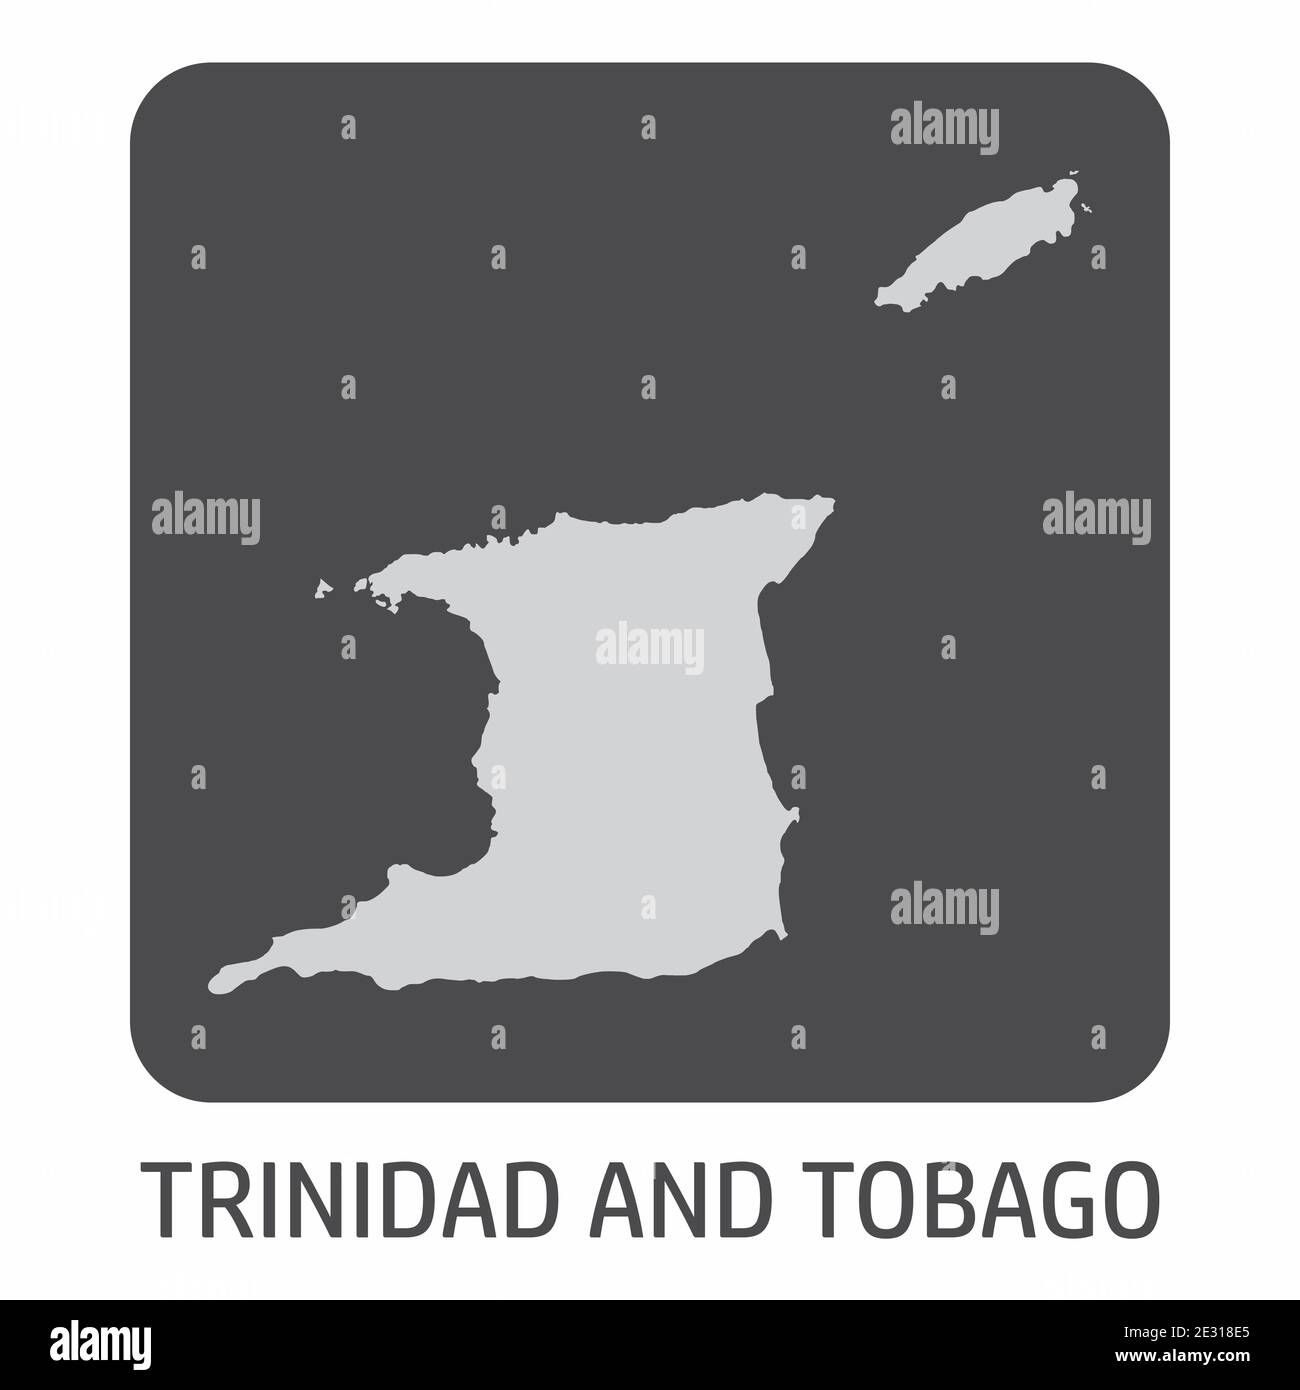 The Trinidad and Tobago silhouette map icon on dark box Stock Vector